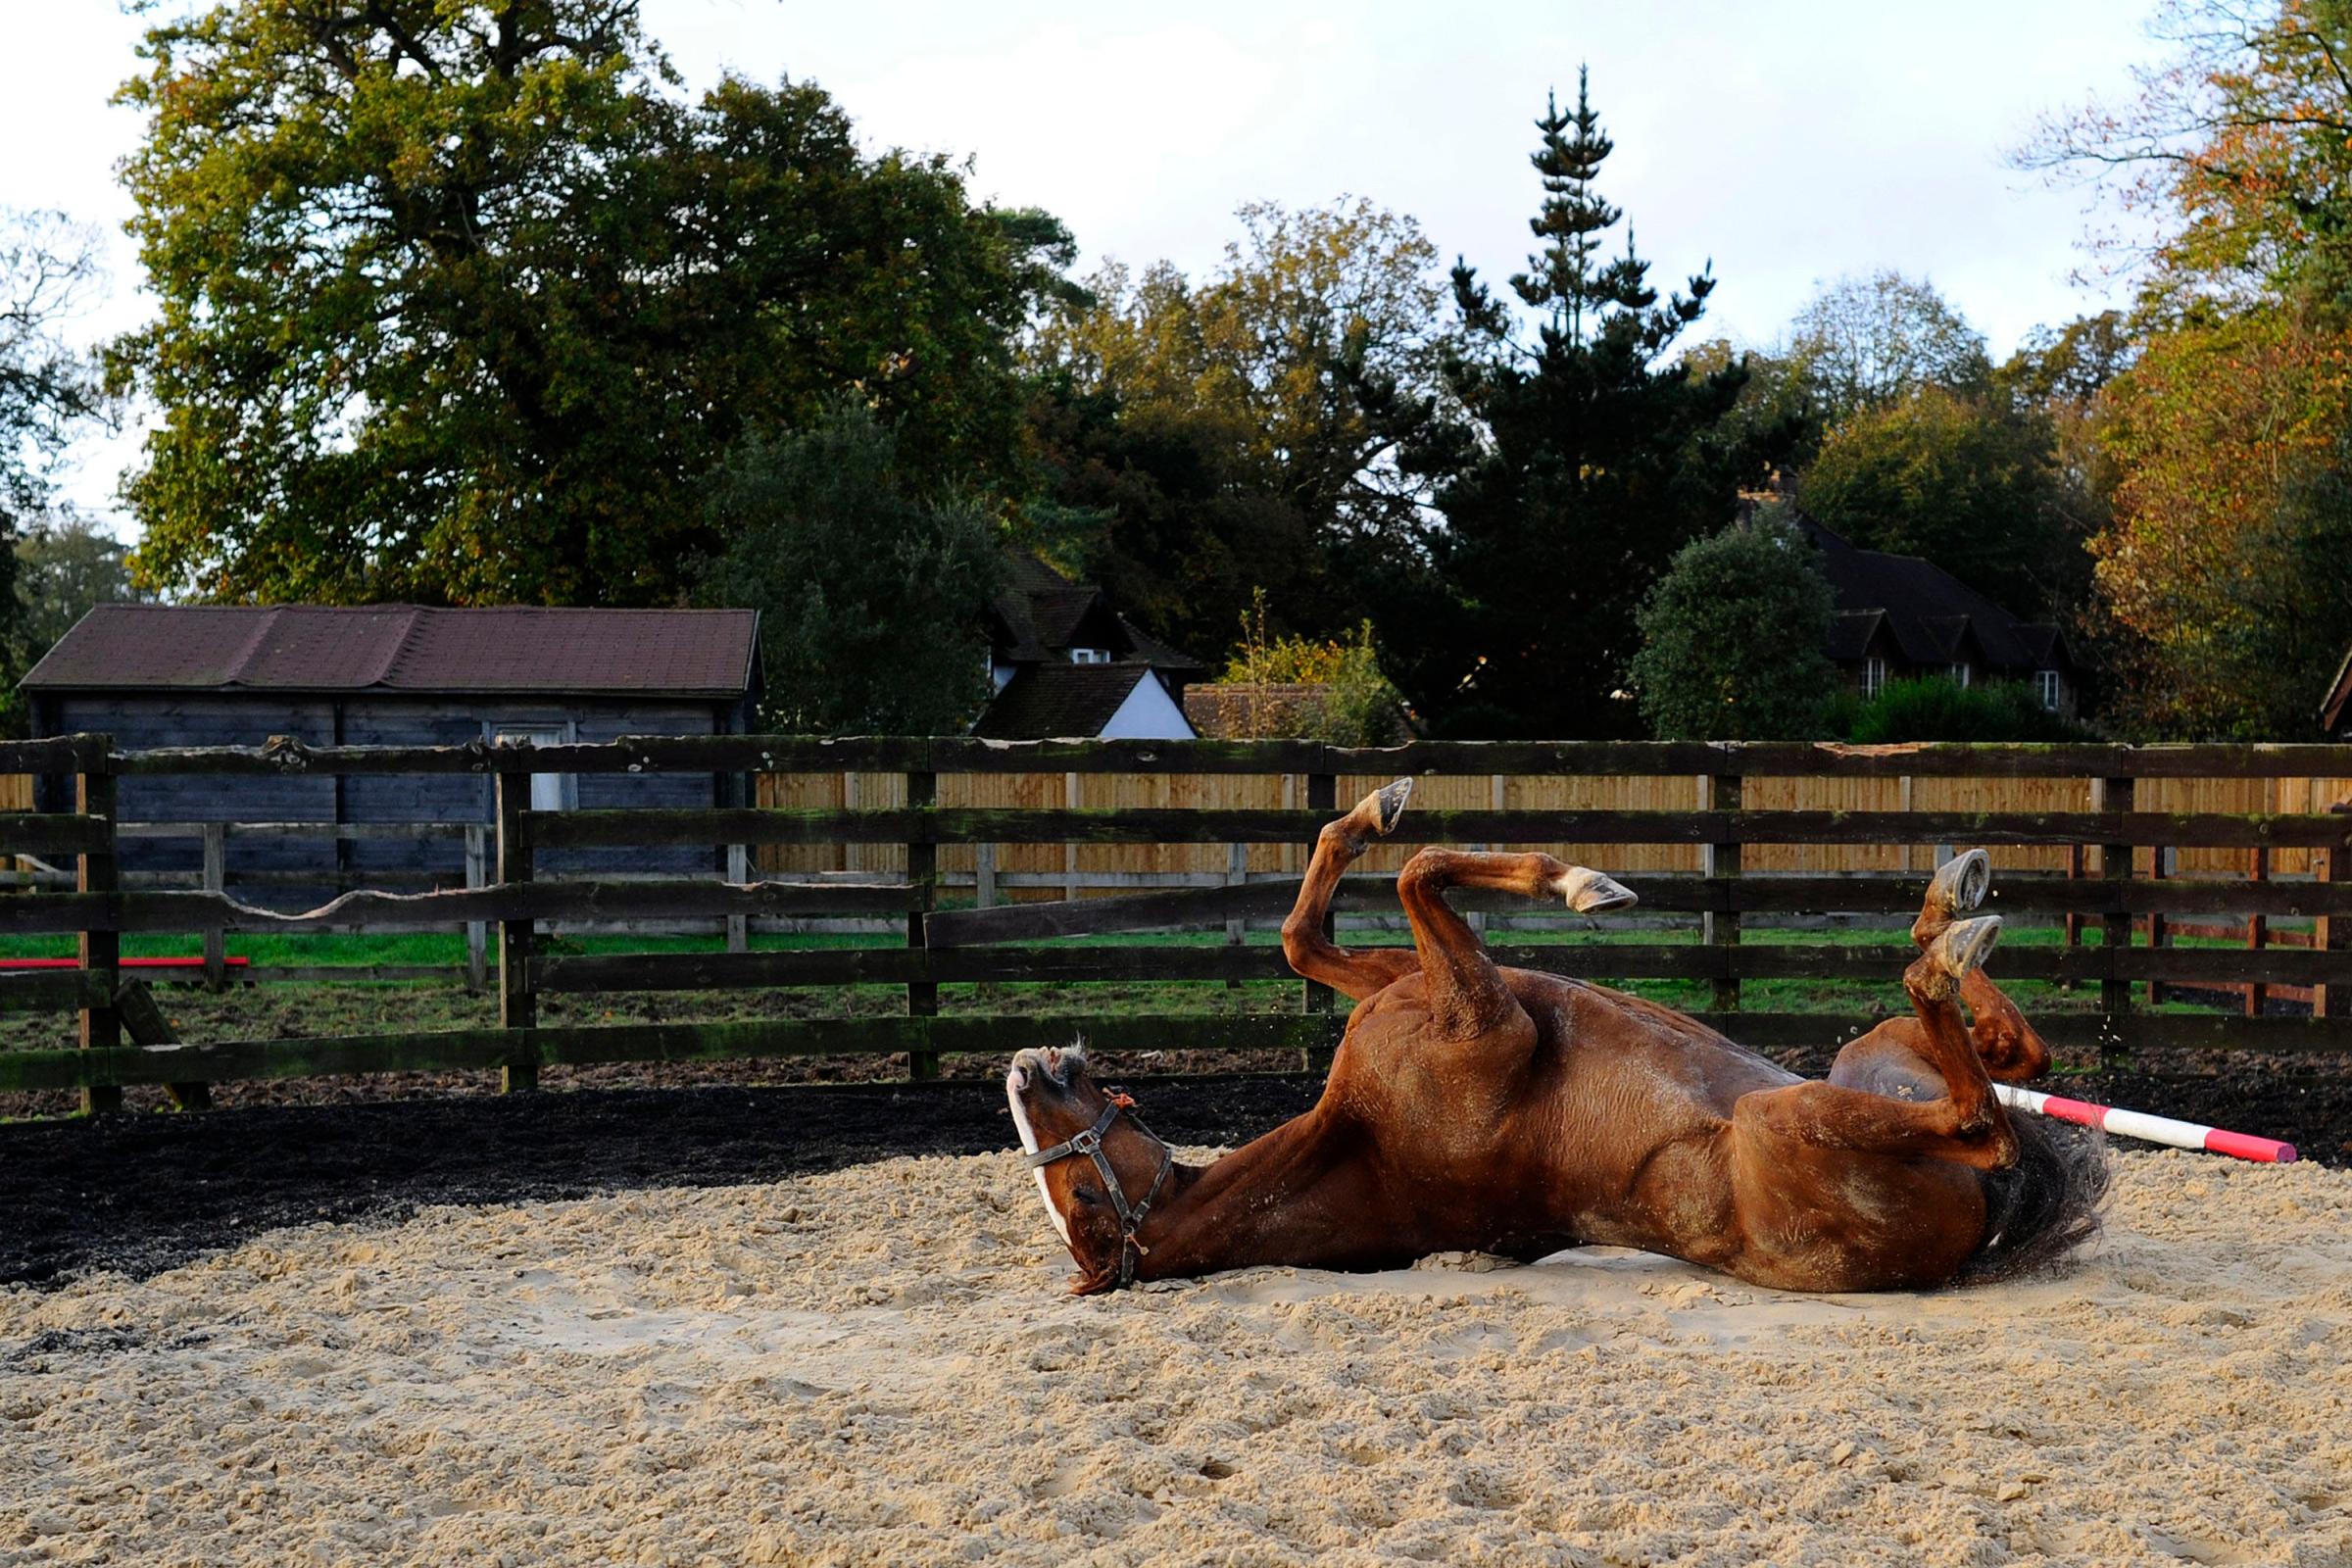 Sire De Grugy enjoys a roll in the sand after cantering at Gary Moore's Ciswood Racing Stables on Oct. 27, 2014 in Horsham, England.